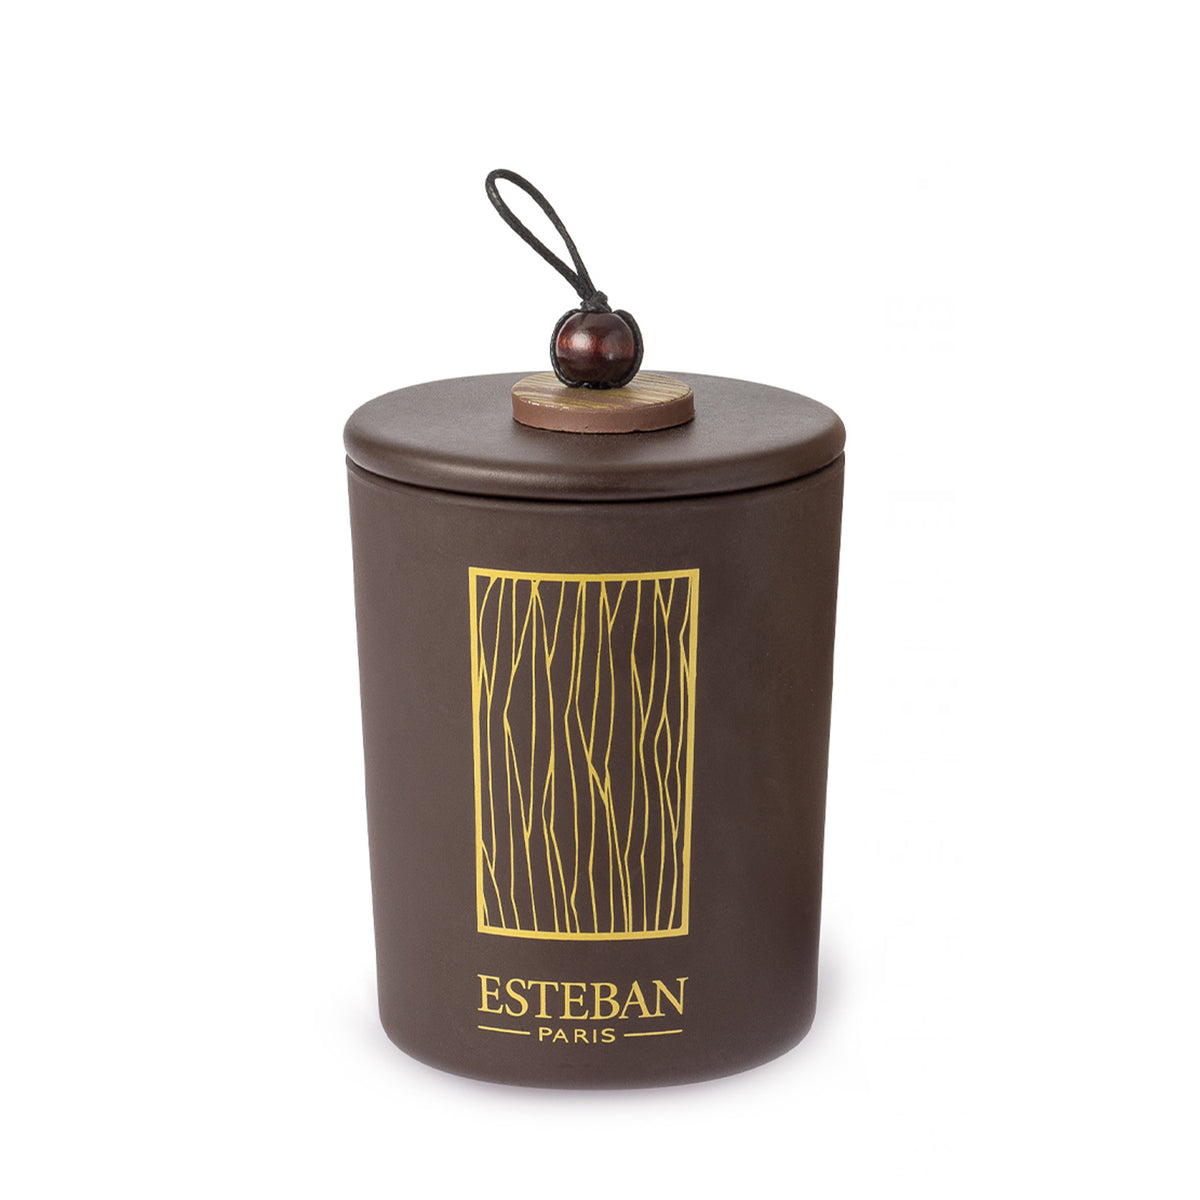 We offer the possibilities of Esteban Cèdre Candle Esteban at rational price